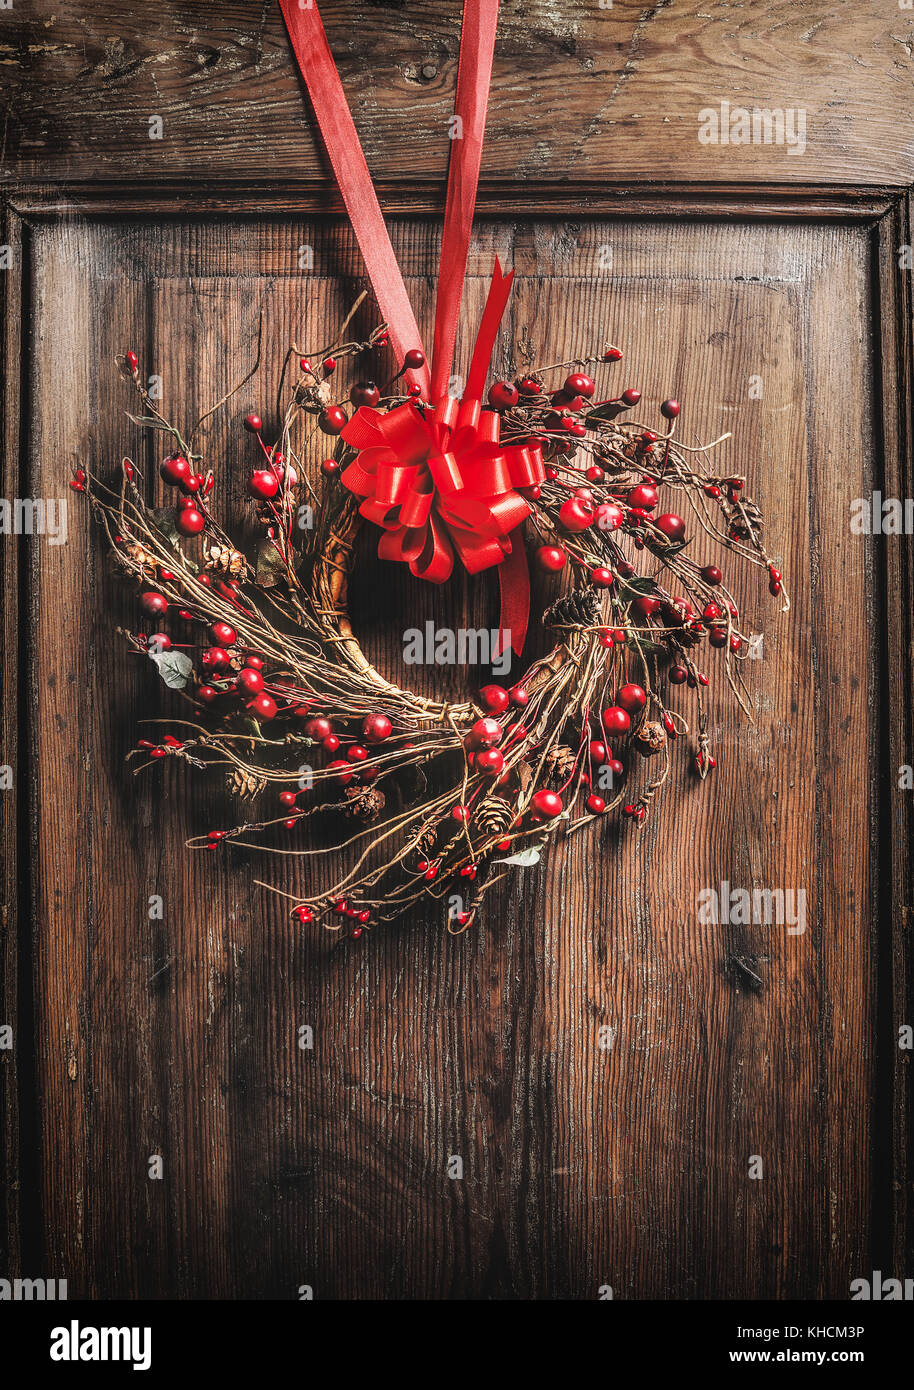 Handmade Christmas wreath hanging on wooden door with red ribbon and berries , front view Stock Photo